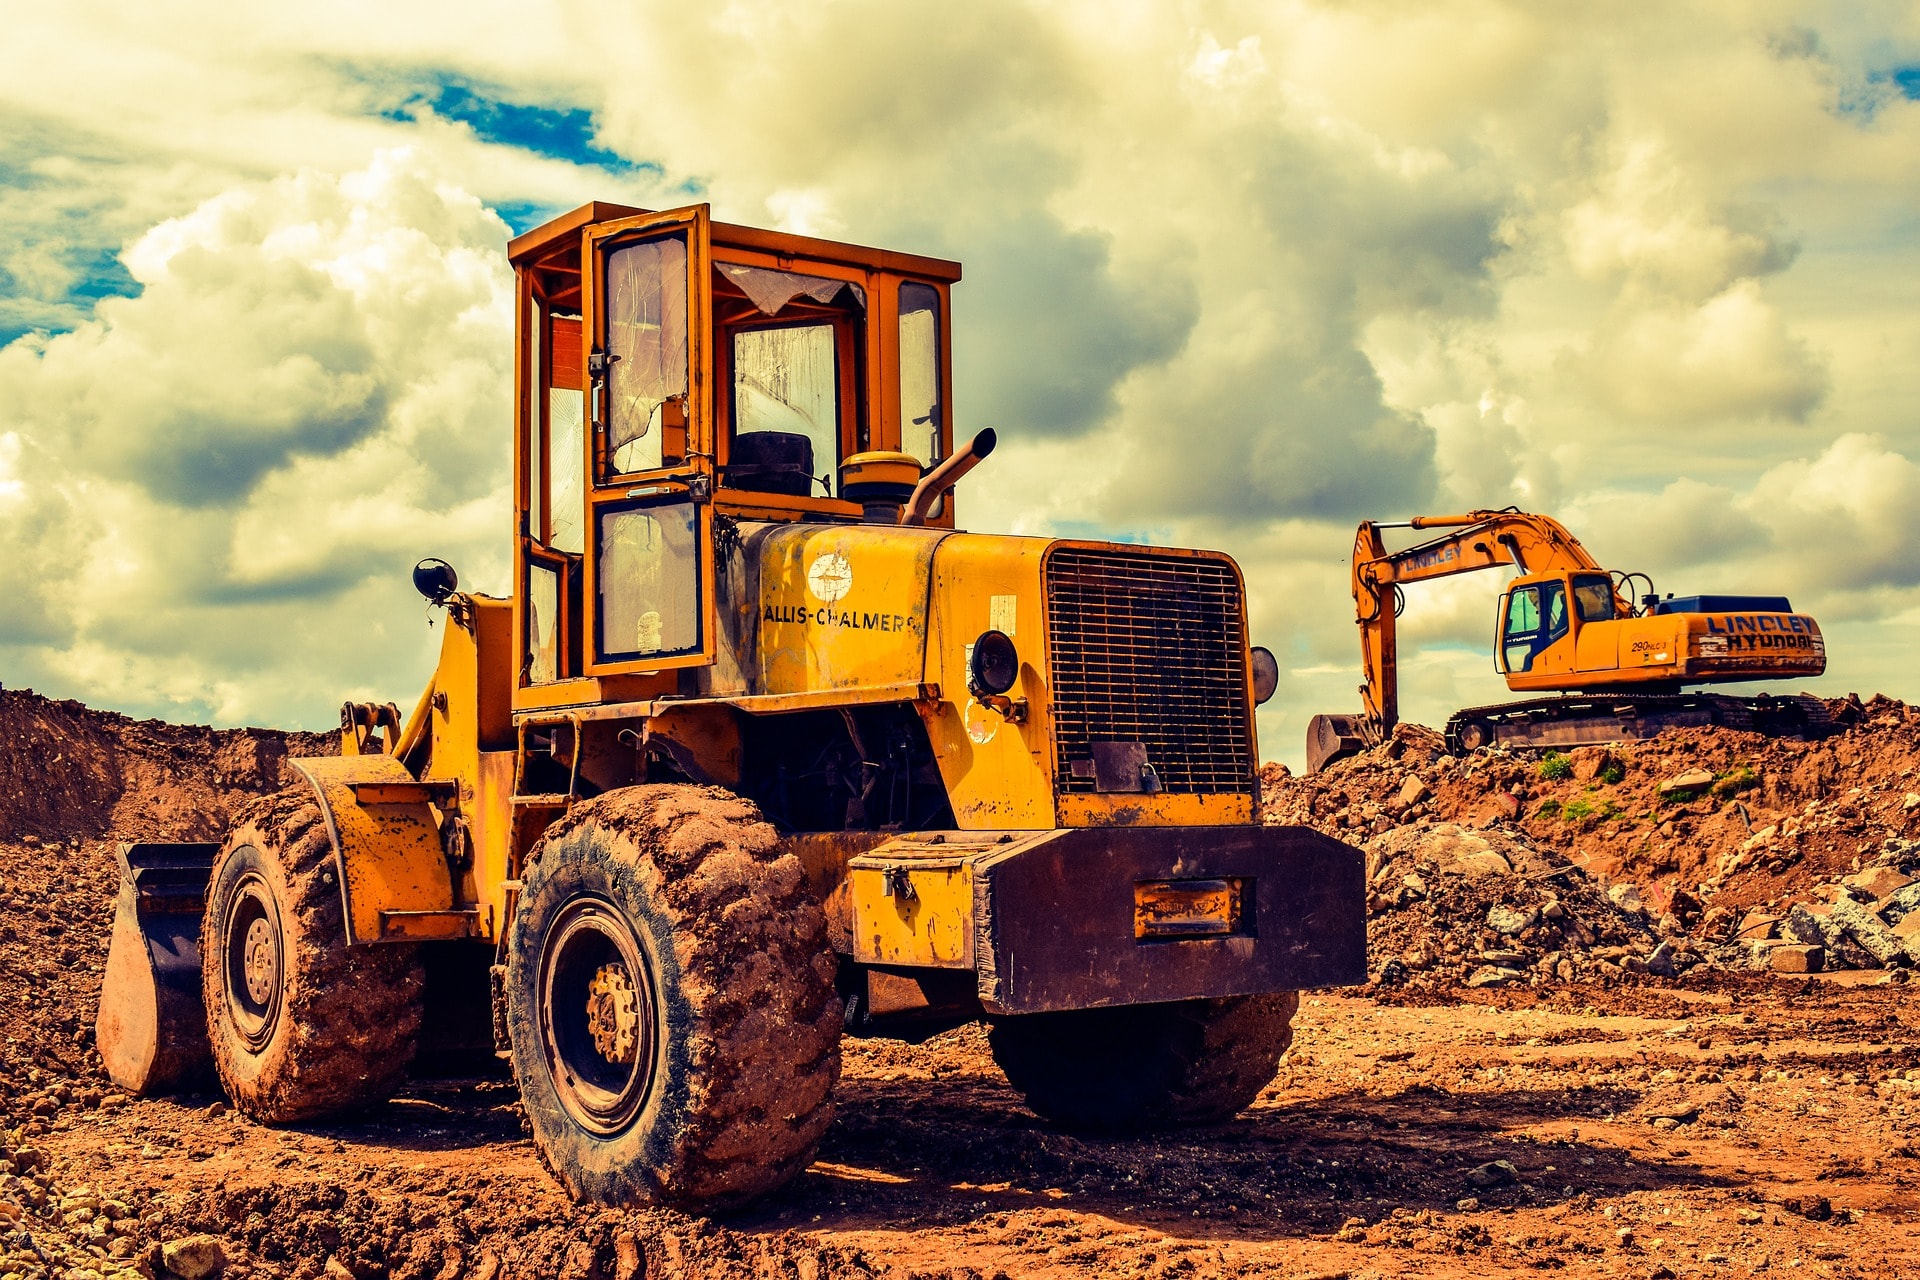 Picture of an industrial dozer and digger working with soil. Used as a background image for the page element.